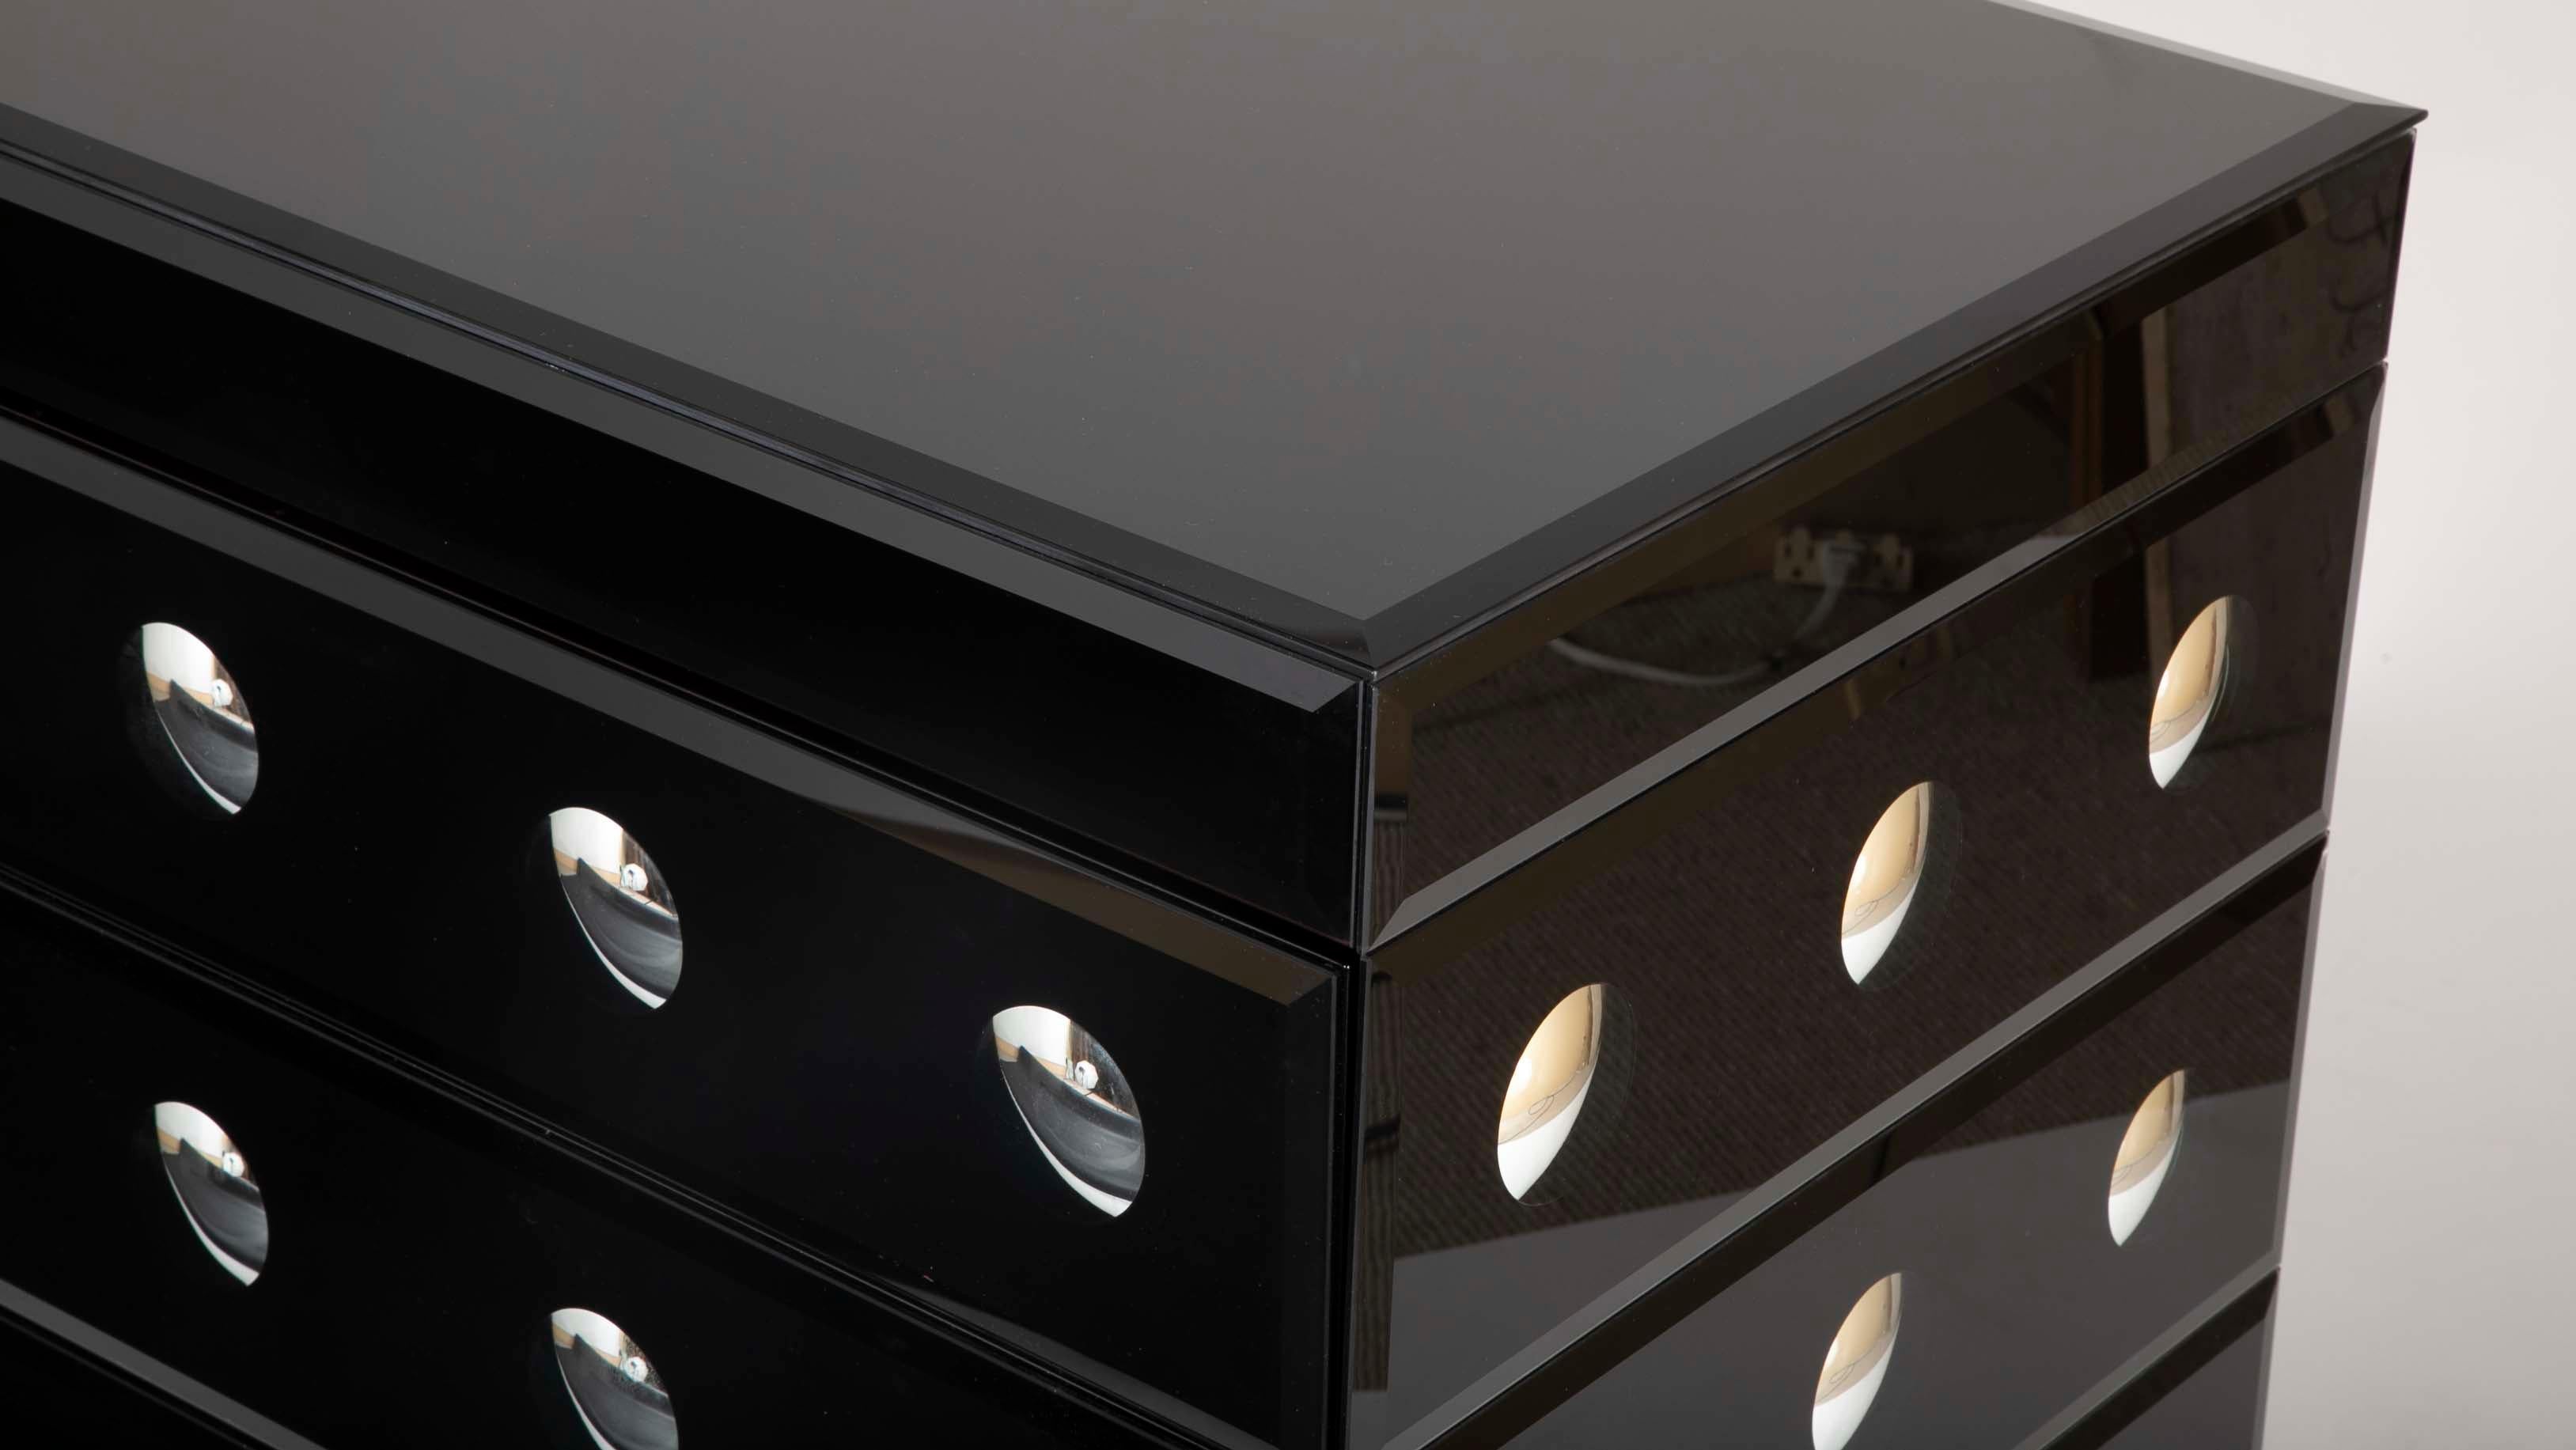 Mirror Chest of Drawers from the Firm of Alberto Pinto